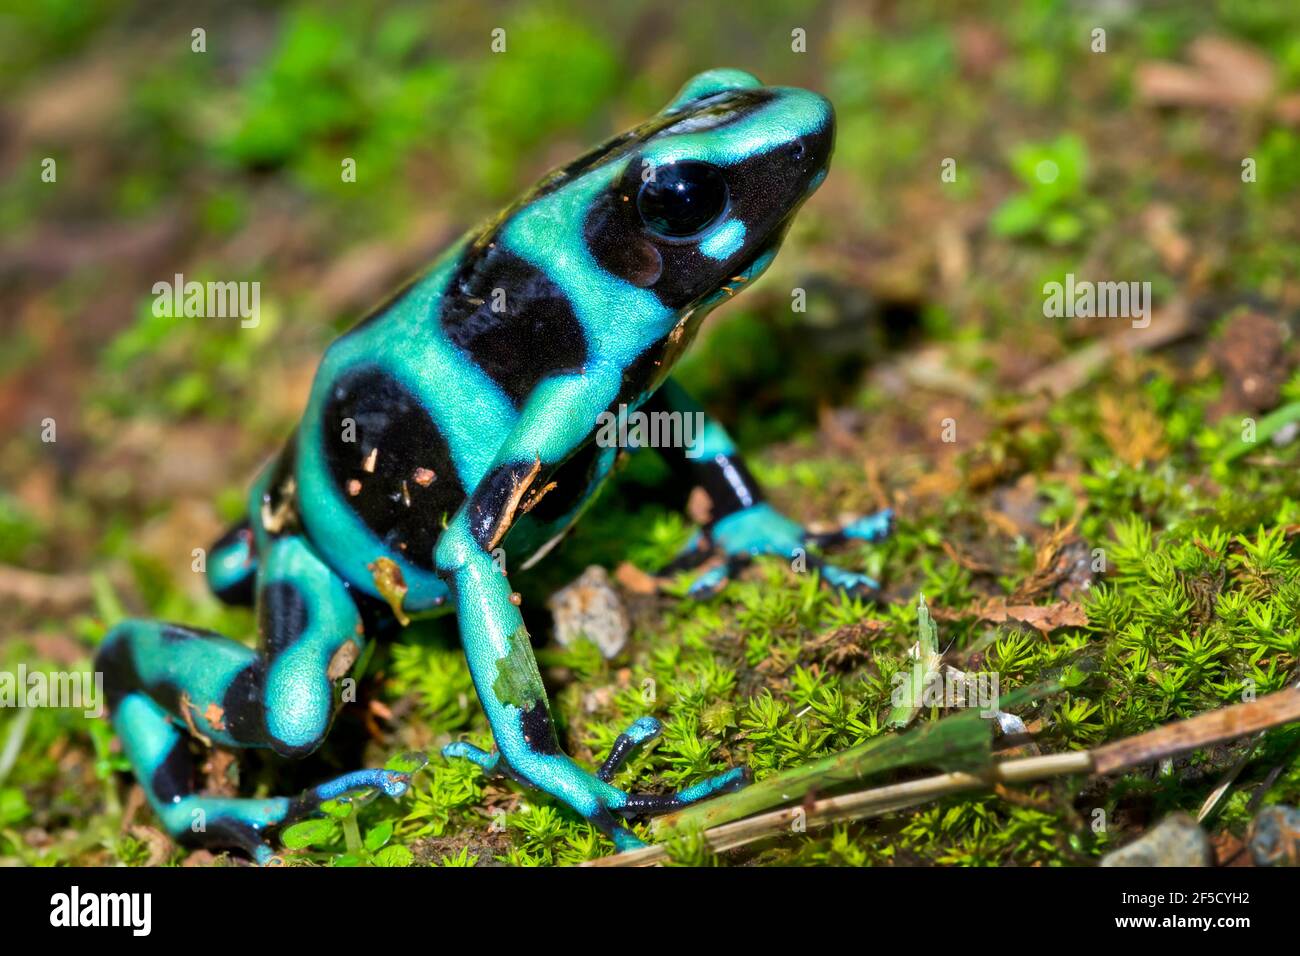 Tropical Rainforest Animals High Resolution Stock Photography And Images Alamy